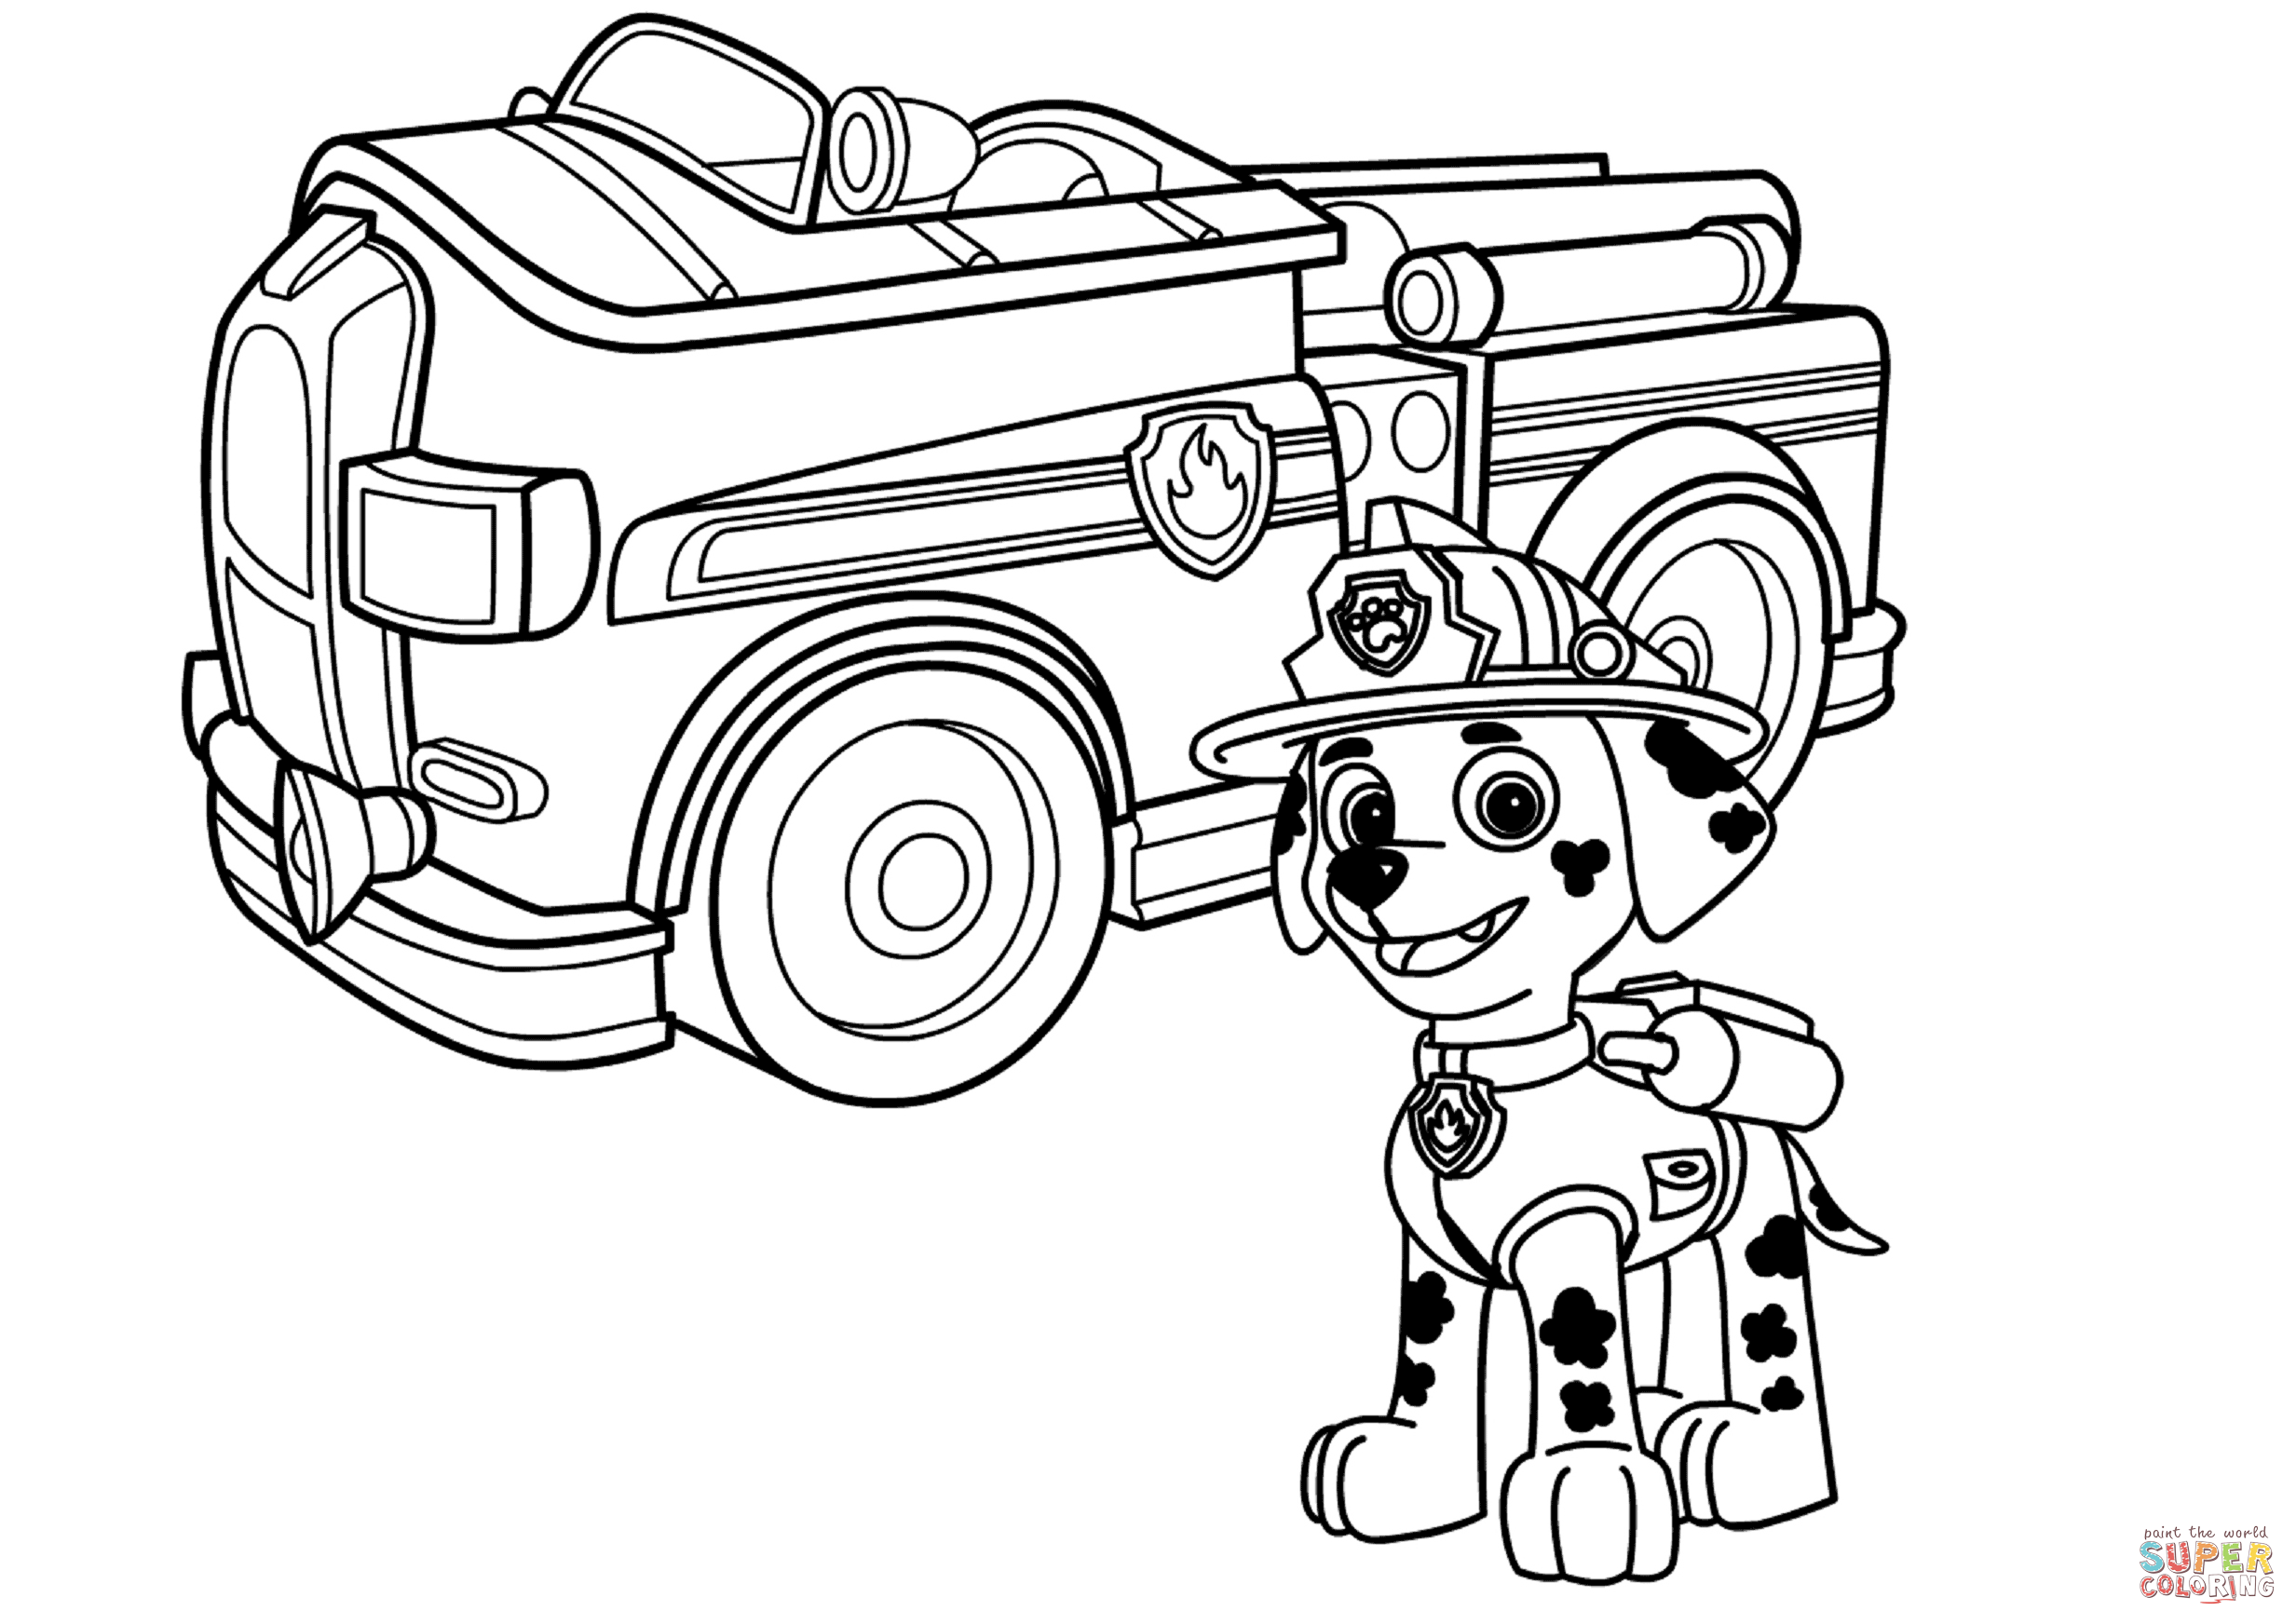 Paw Patrol Marshall with Fire Truck coloring page | Free Printable ...